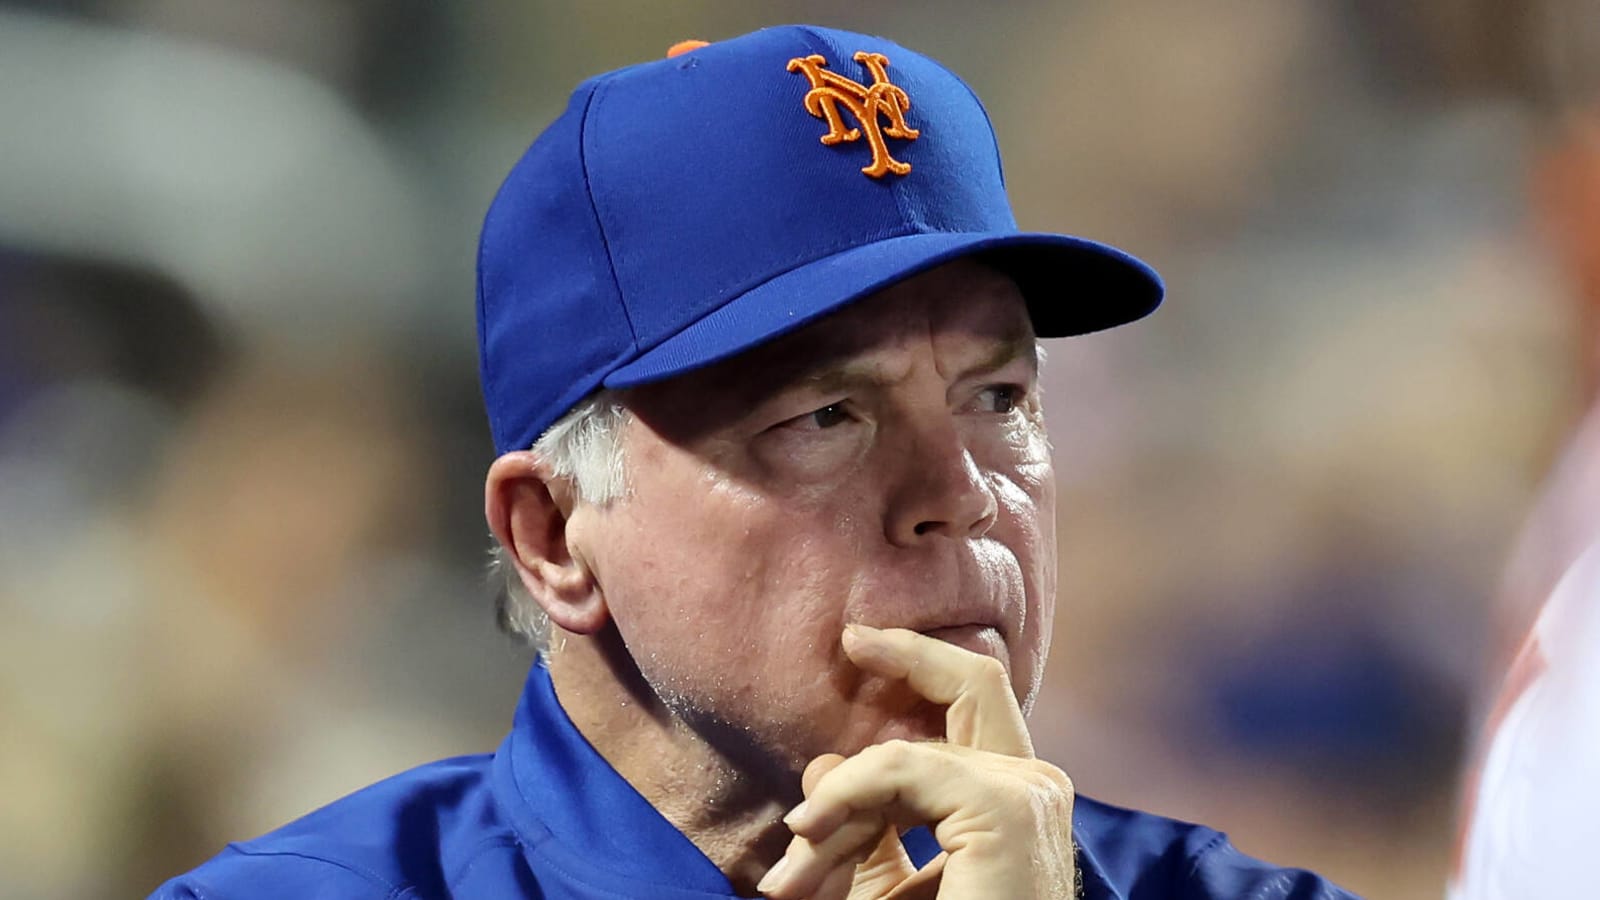 Watch: Mets broadcast goes 'Kill Bill' on Buck Showalter after hit-by-pitch